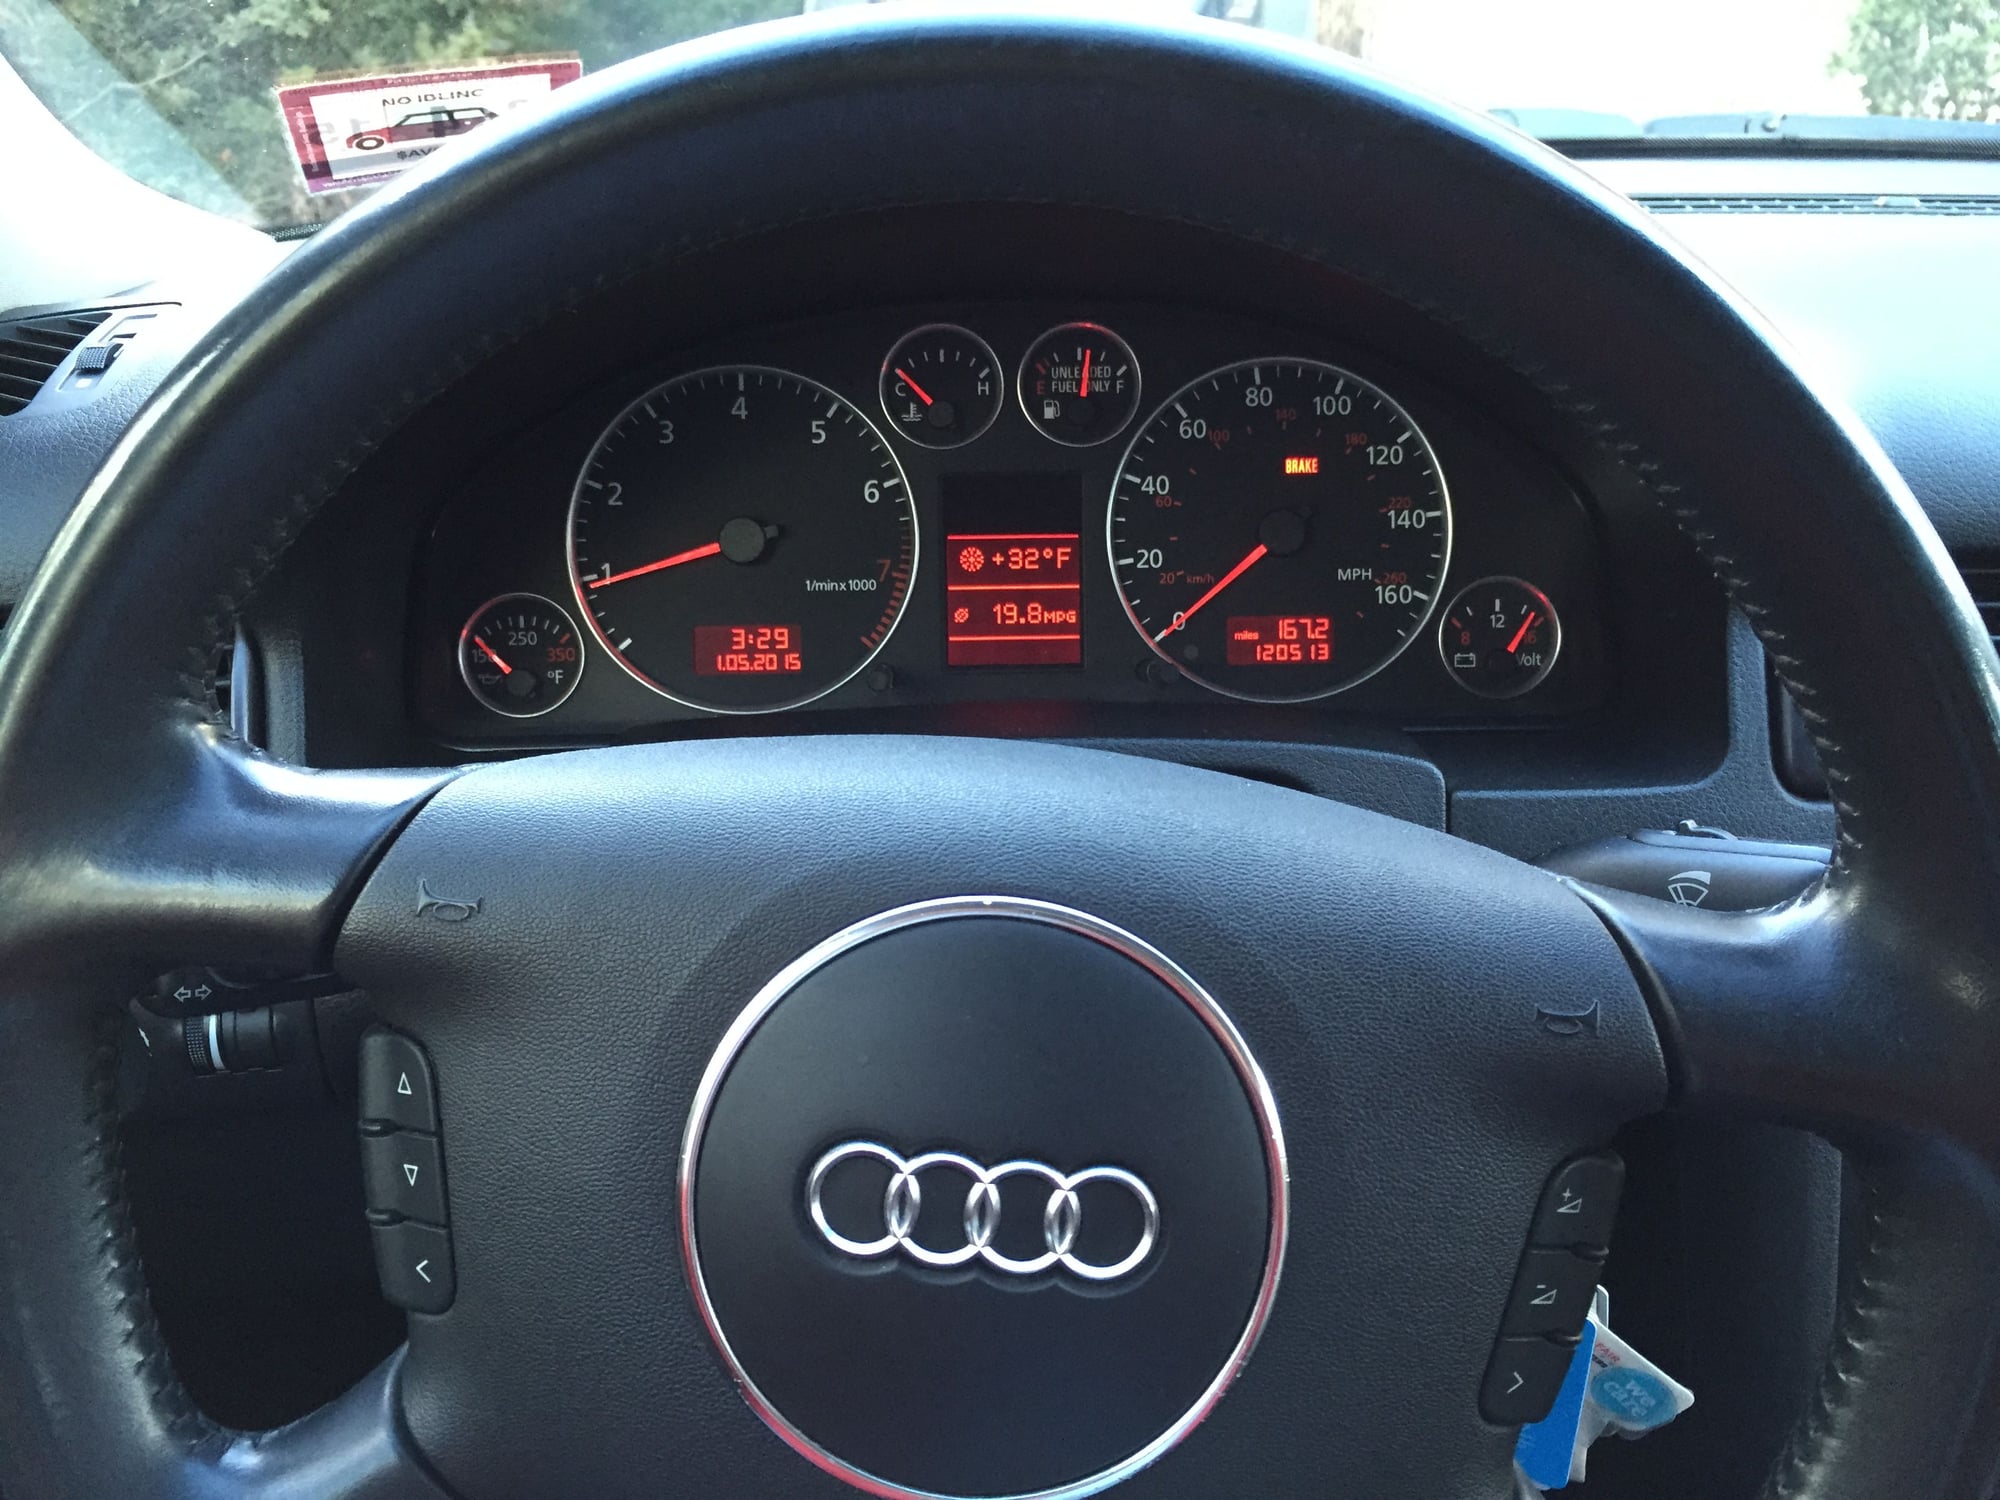 Audi Other 2004 allroad for sale 6 speed manual, all options